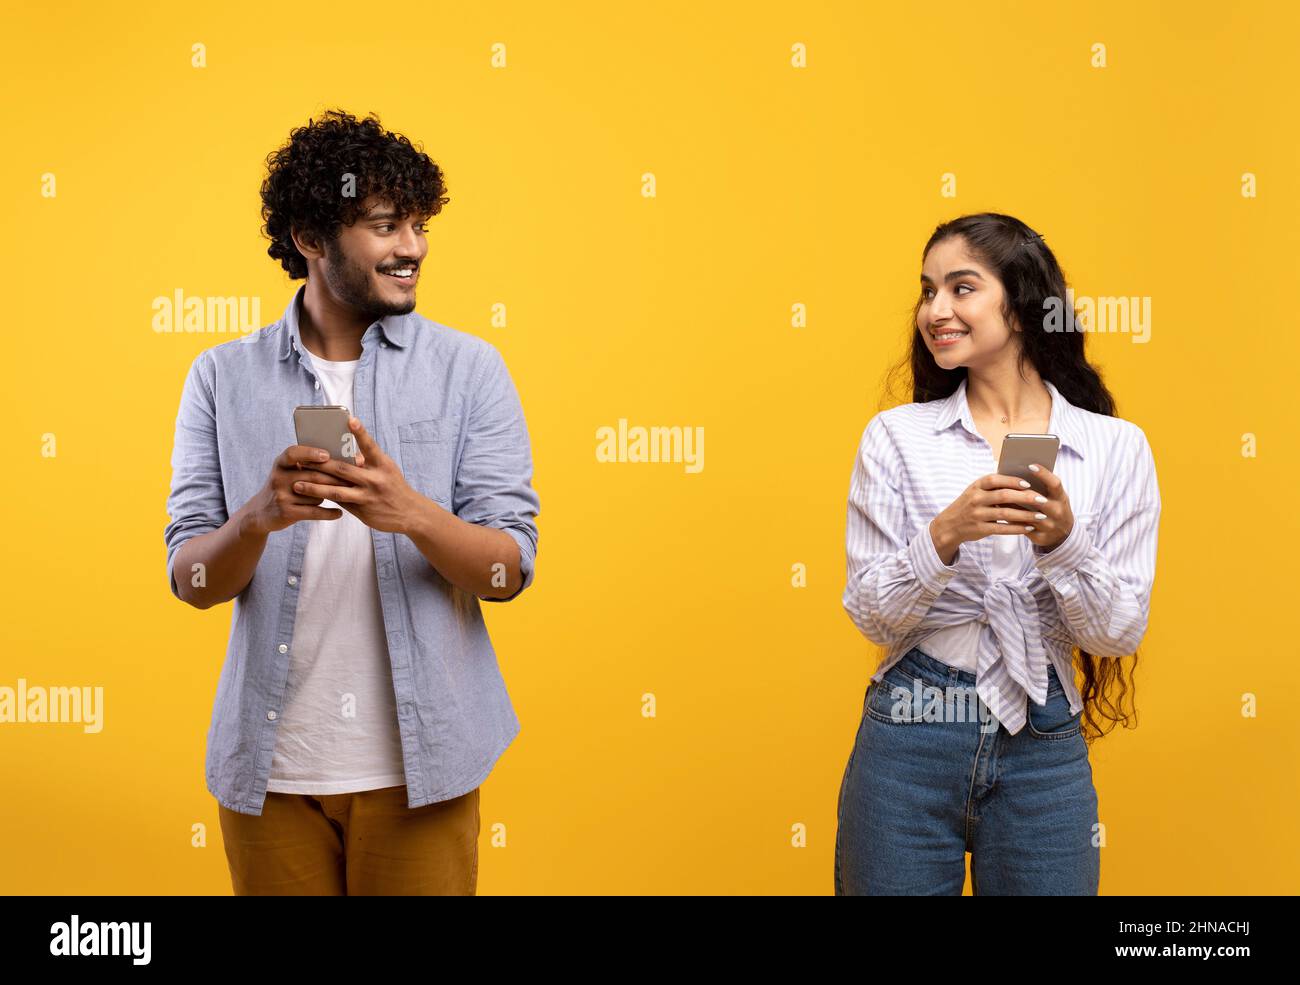 Cheerful young indian man and woman in casual outfits holding smartphones, looking at each other and smiling Stock Photo